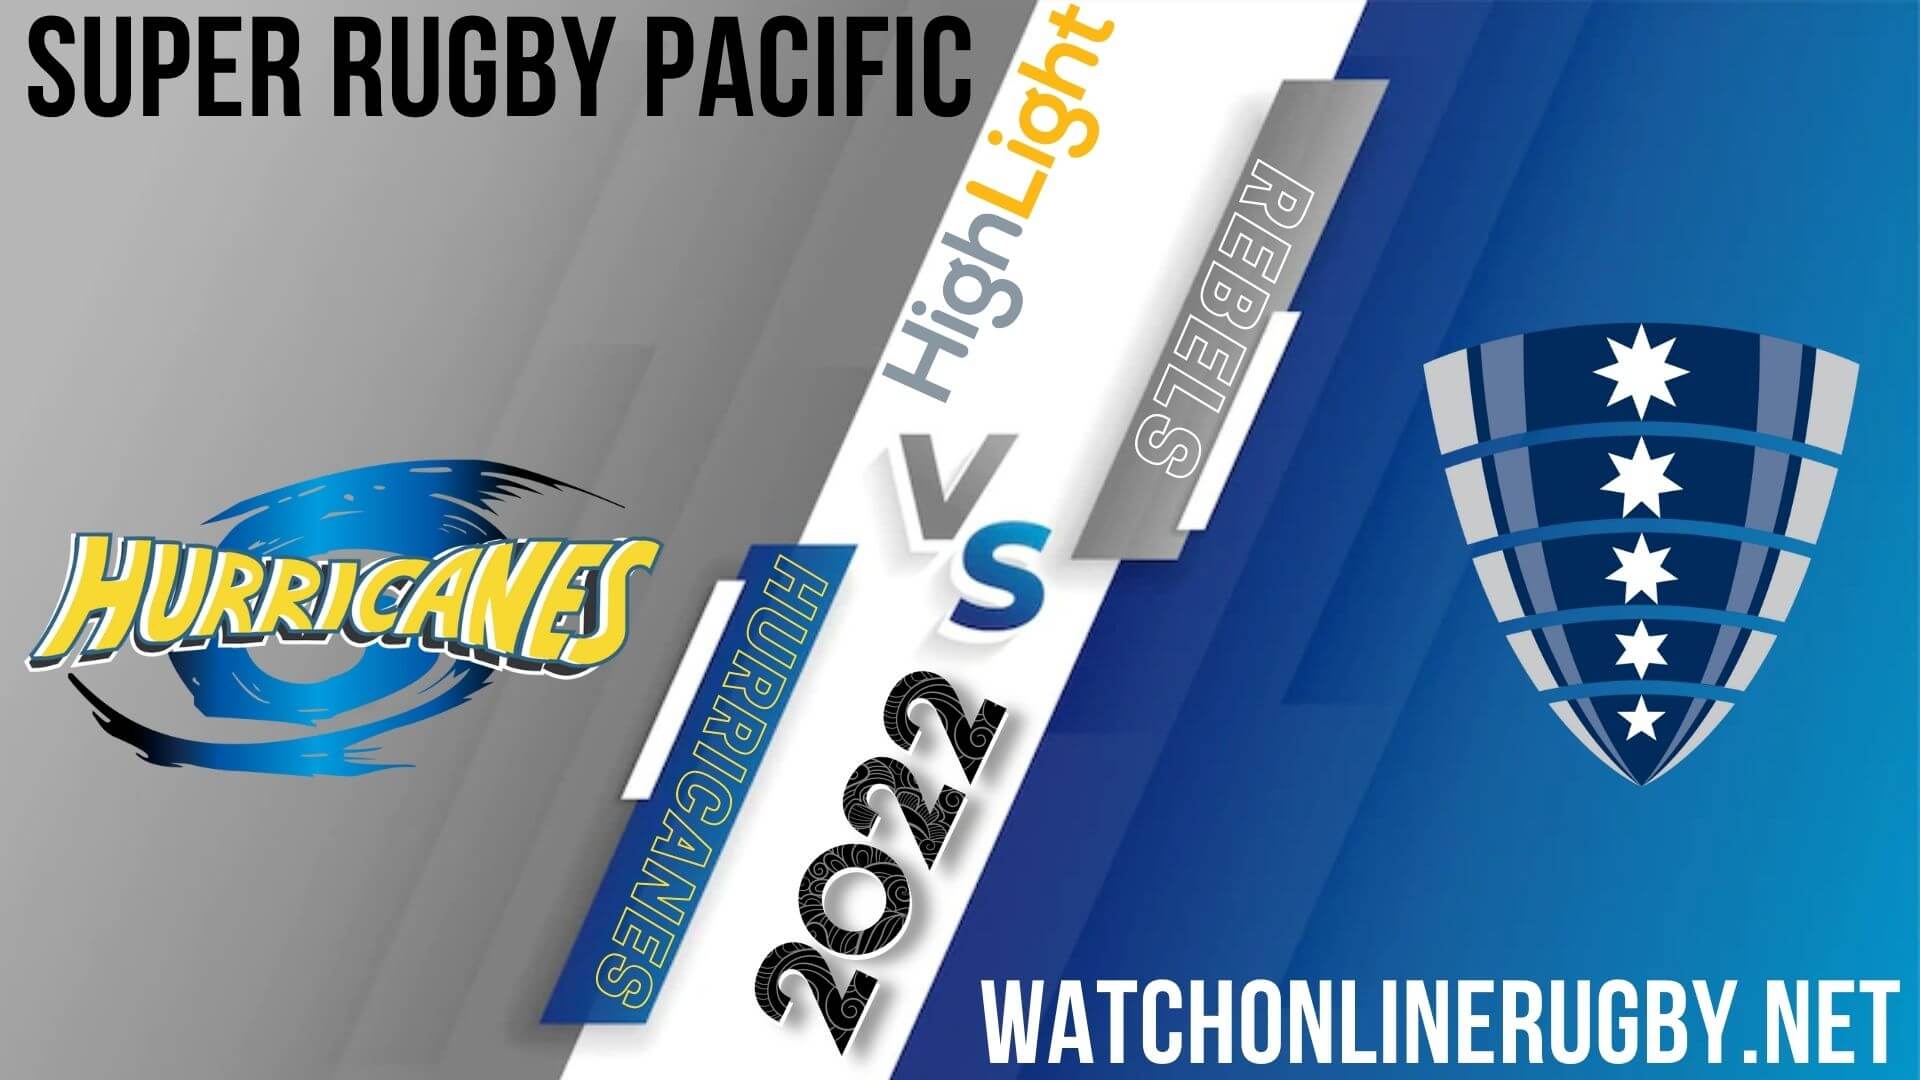 Hurricanes Vs Rebels Super Rugby Pacific 2022 RD 14